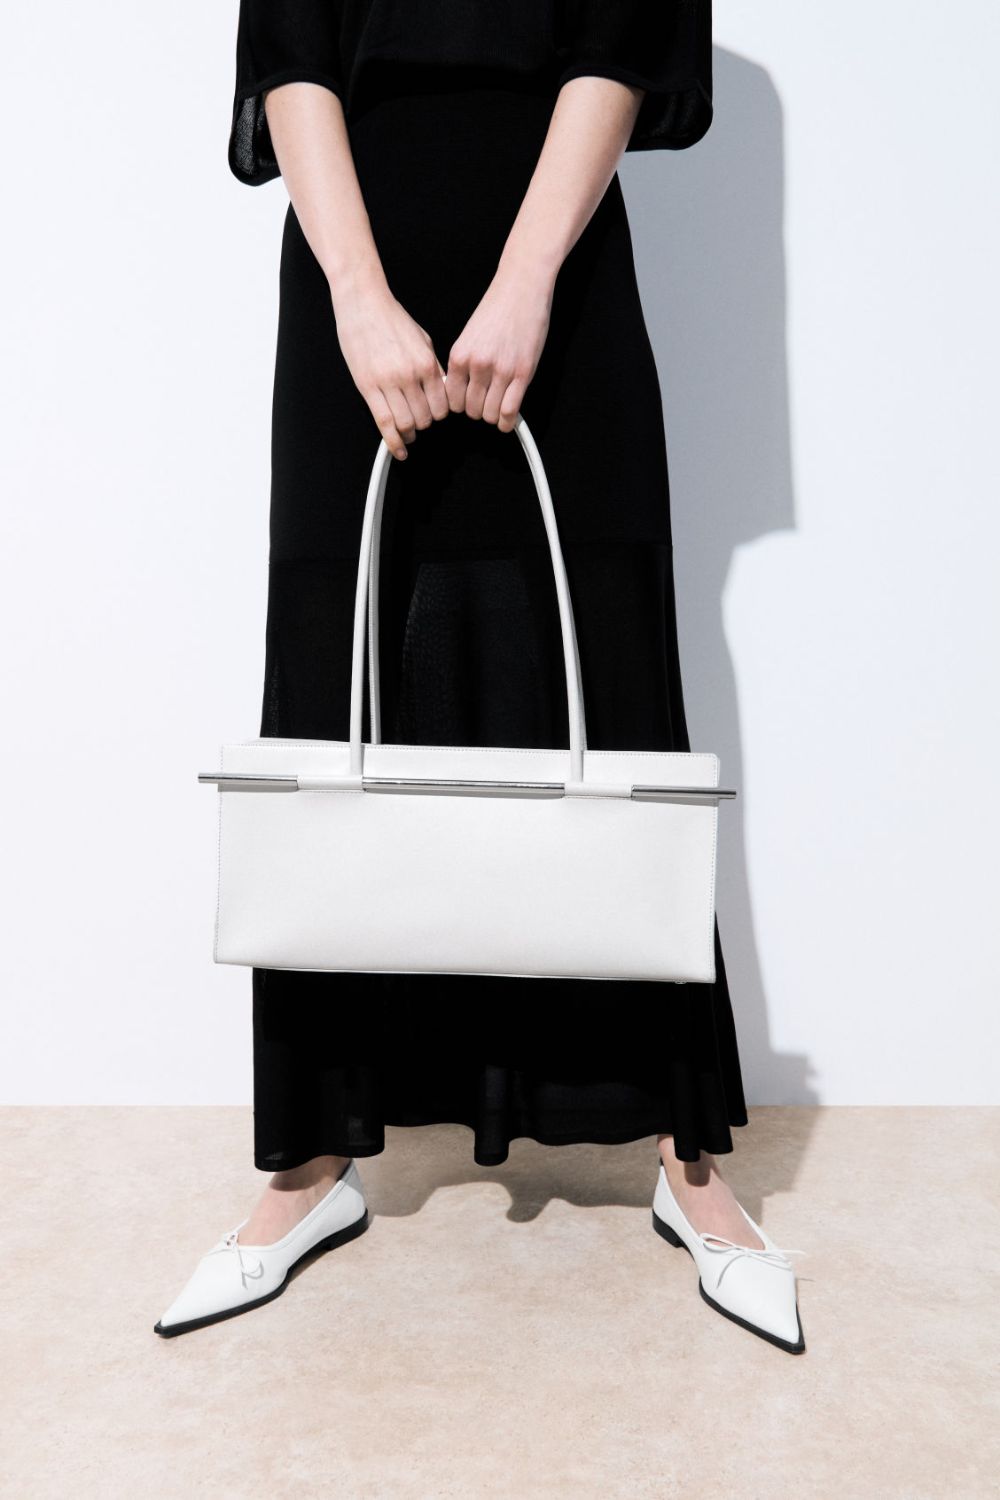 The Structured Tote